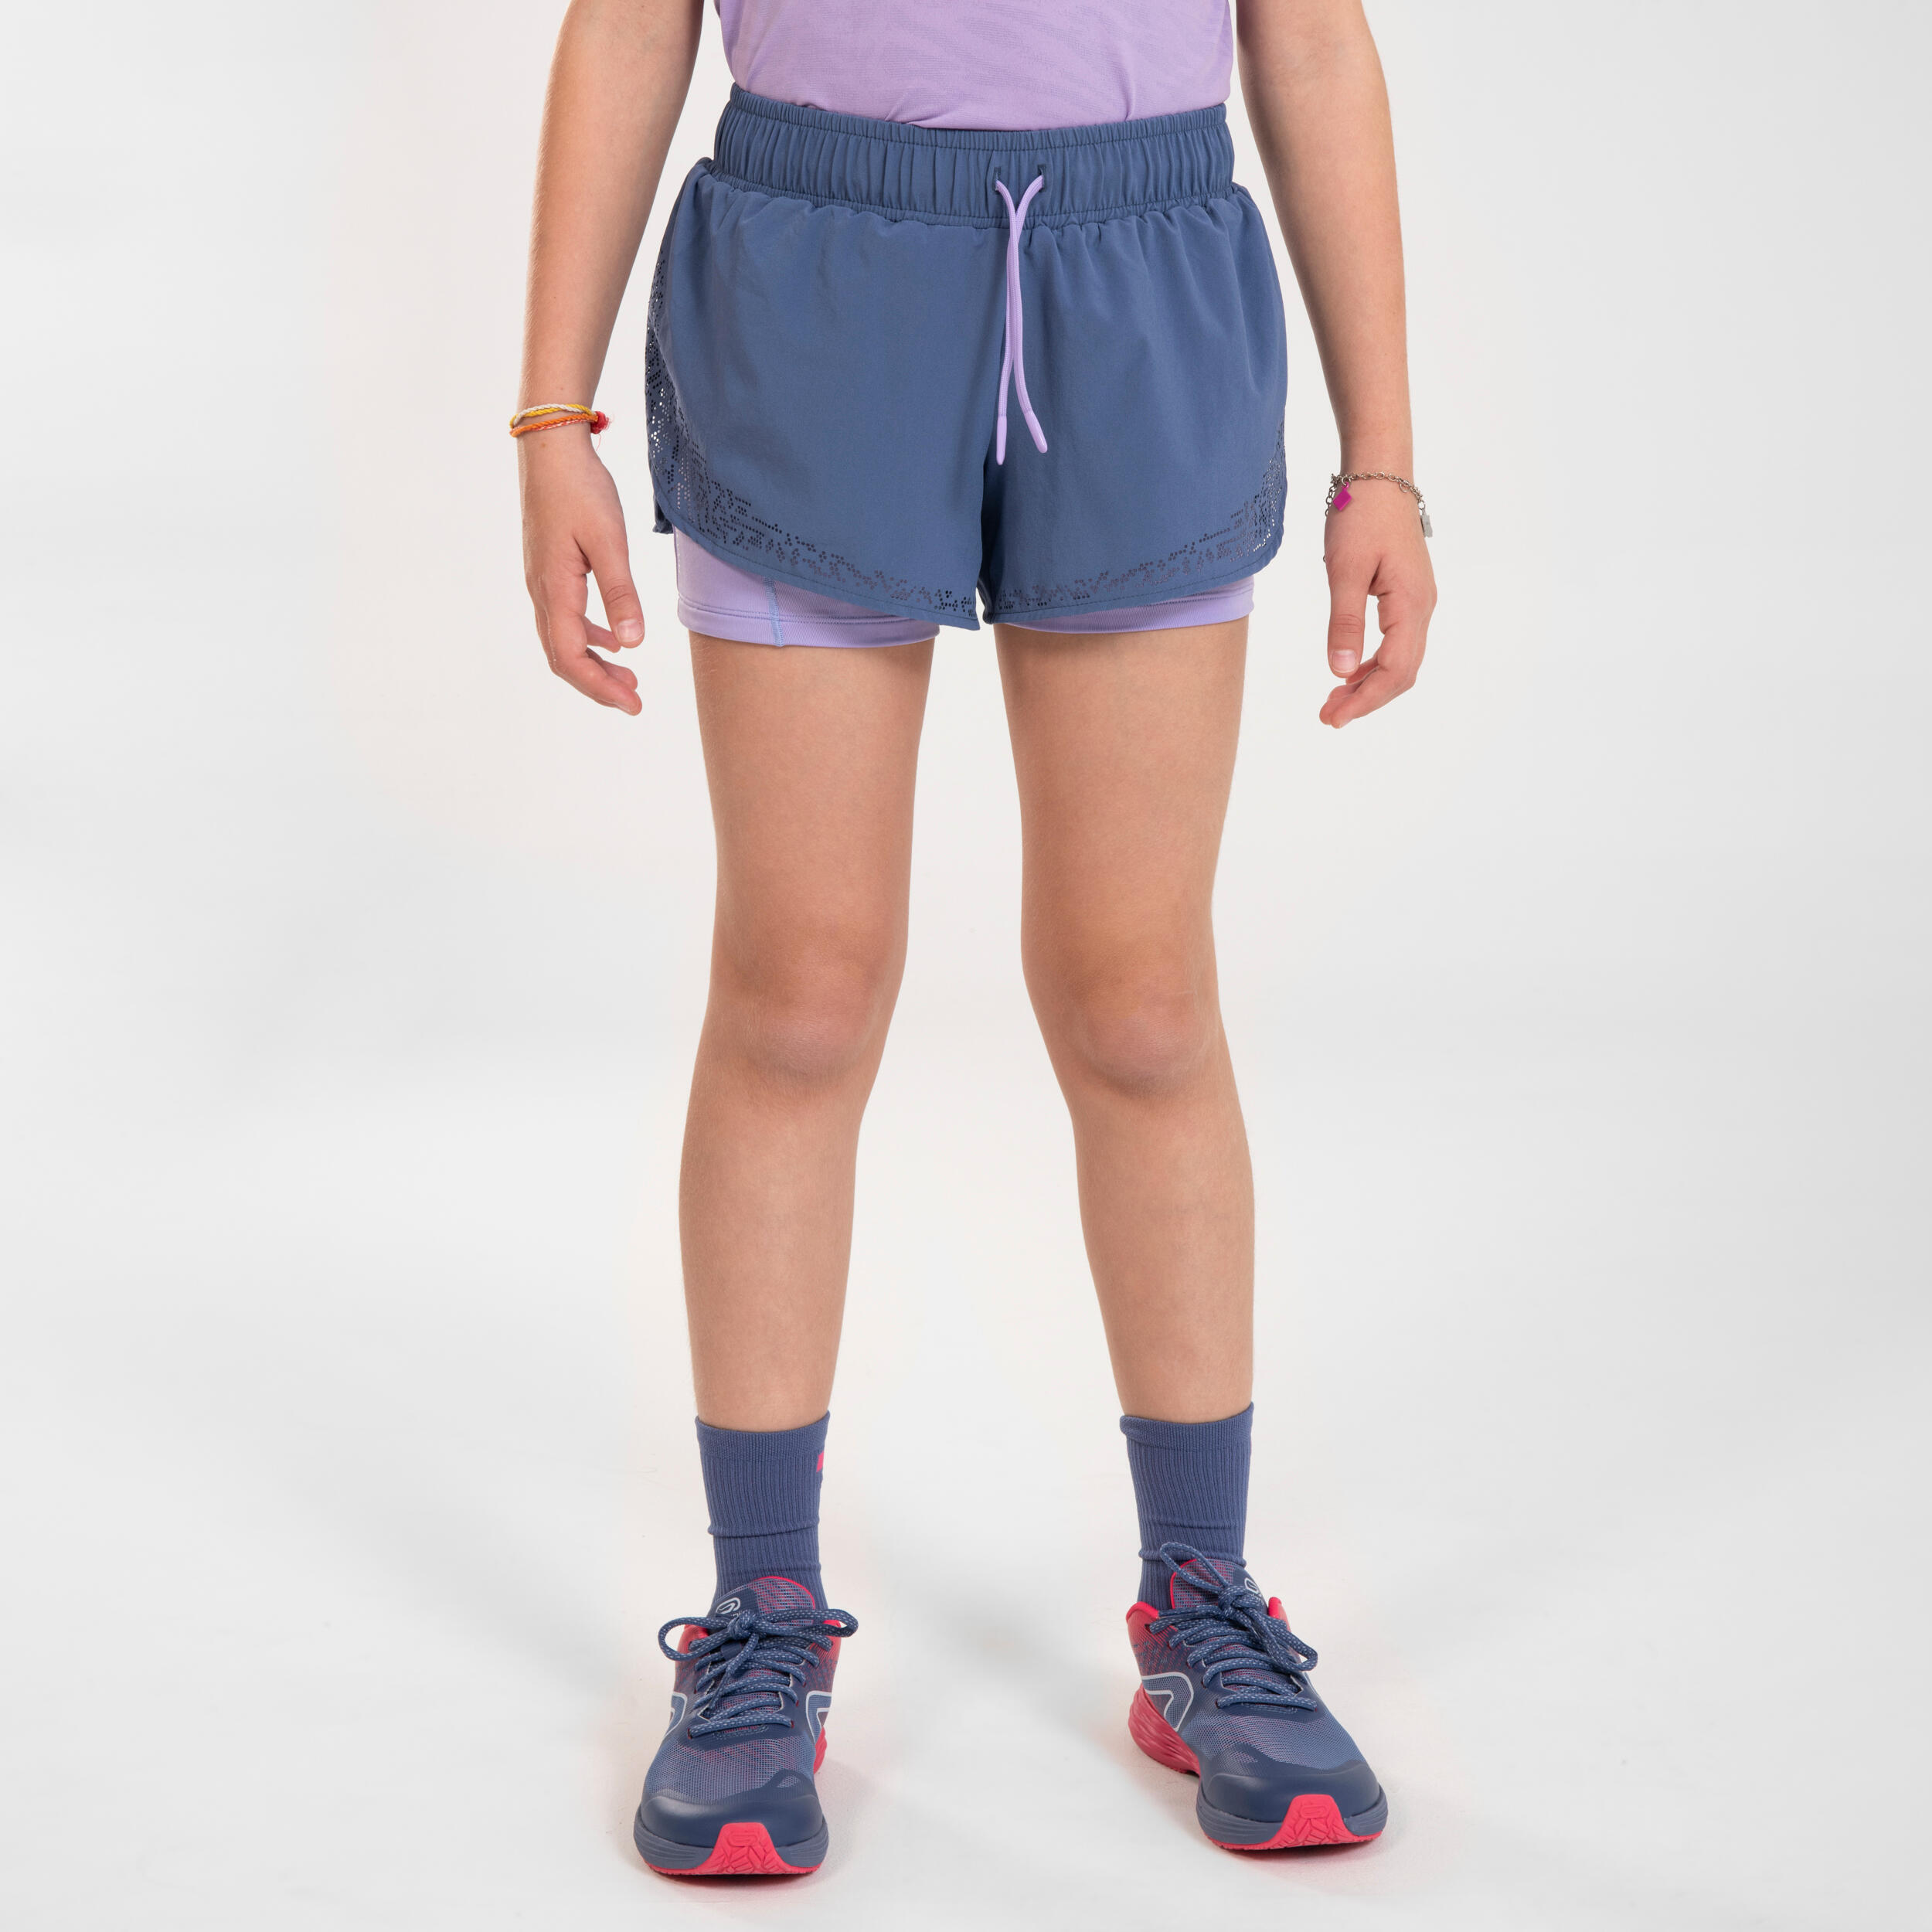 KIPRUN DRY+ girl's breathable 2-in-1 tight running shorts - denim and mauve 1/14